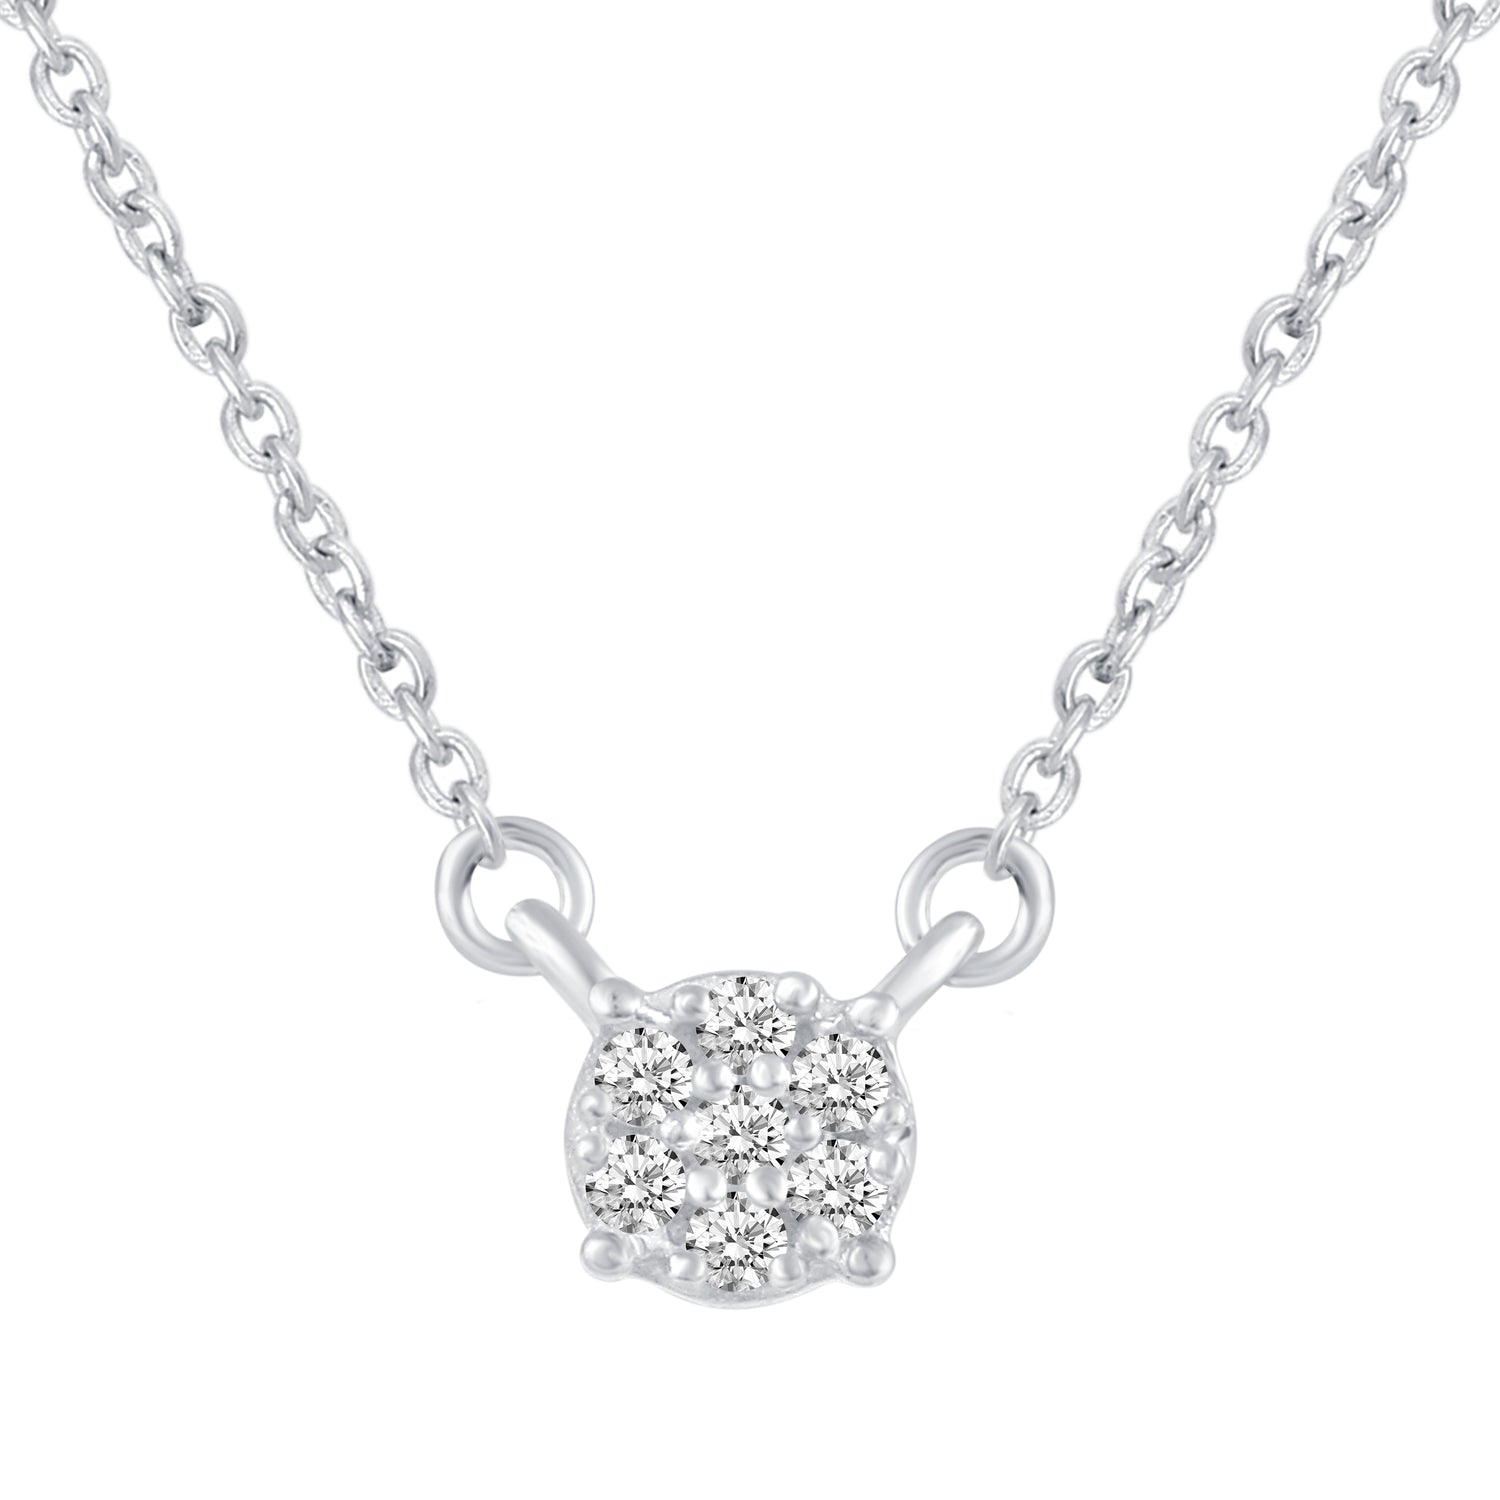 Round Cluster 1/20 Cttw Natural Diamond Pendant Necklace set in 925 Sterling Silver